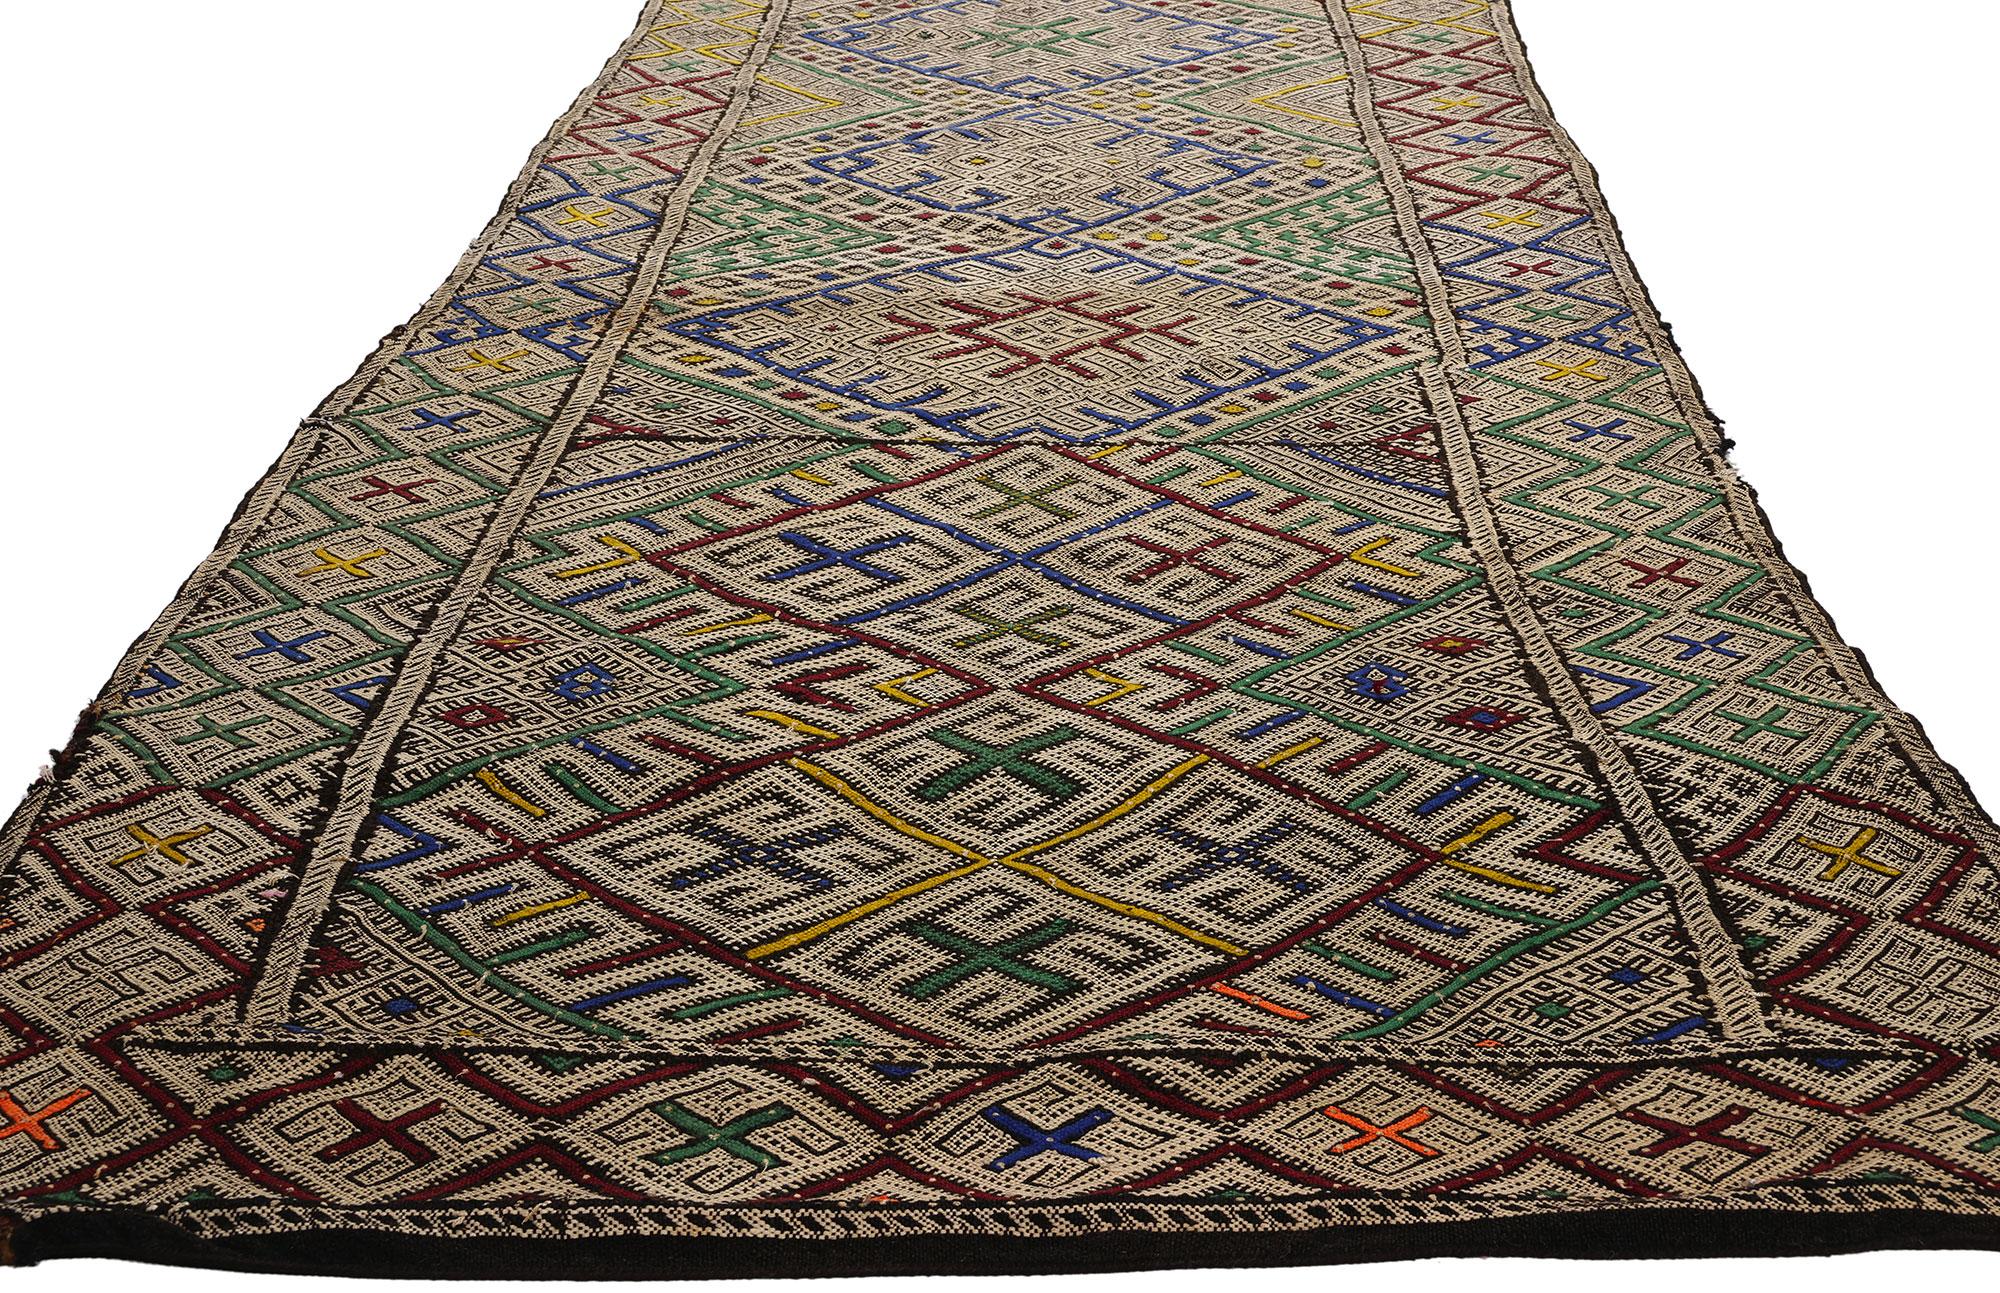 21846 Vintage Zemmour Moroccan Rug, 03'05 x 22'04. Presenting our extra-long handwoven wool kilim rug—a captivating Moroccan runner crafted by the skilled artisans of the Zemmour Tribe in the Middle Atlas Mountains of Morocco. Embracing the revered